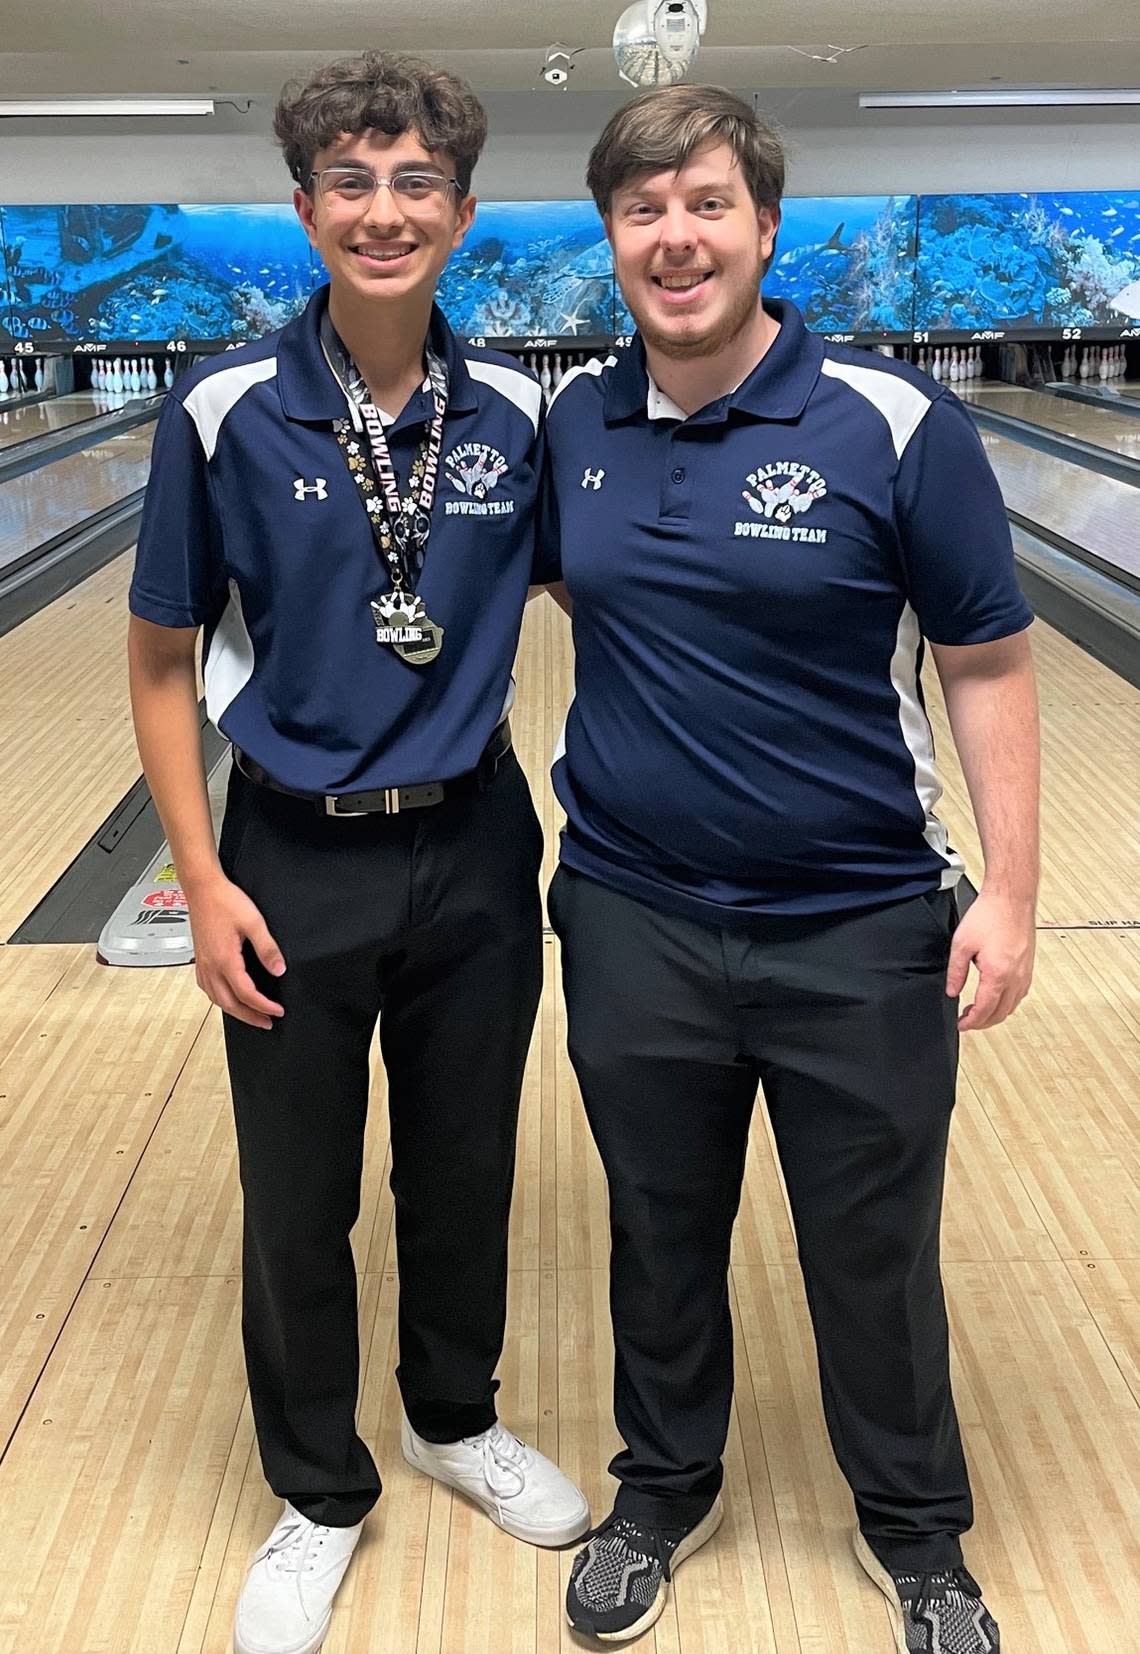 Bowlers Donovin Lau of Coral Reef and Evan Viener of Palmetto qualified for state.